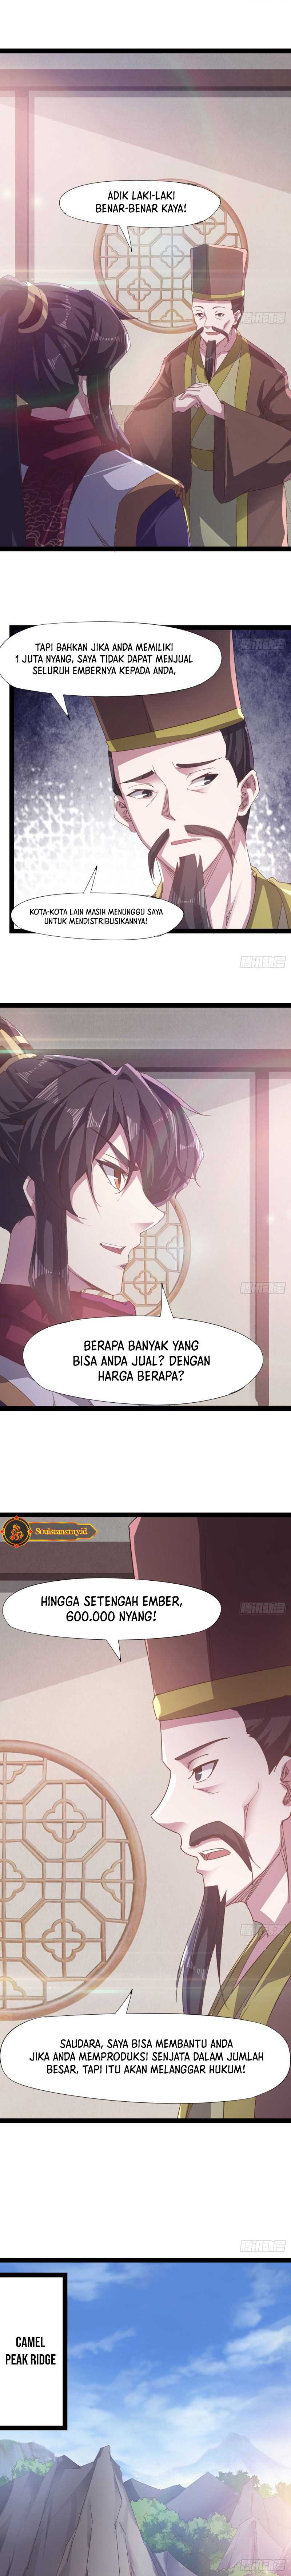 Path Of The Sword Chapter 33